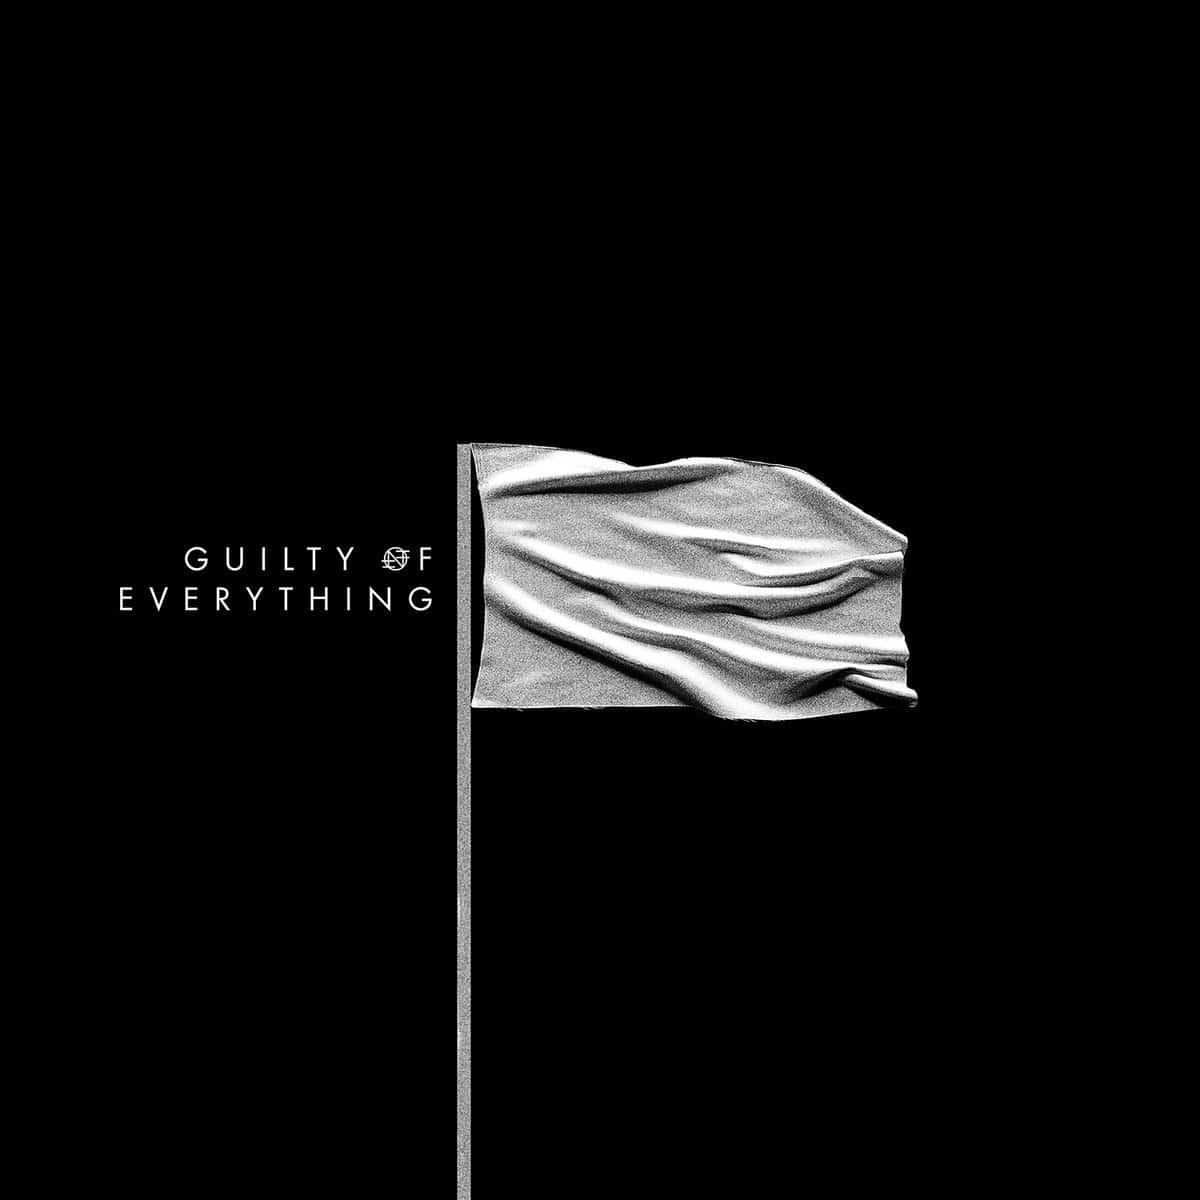 Relapse Records CD Nothing "Guilty of Everything" CD